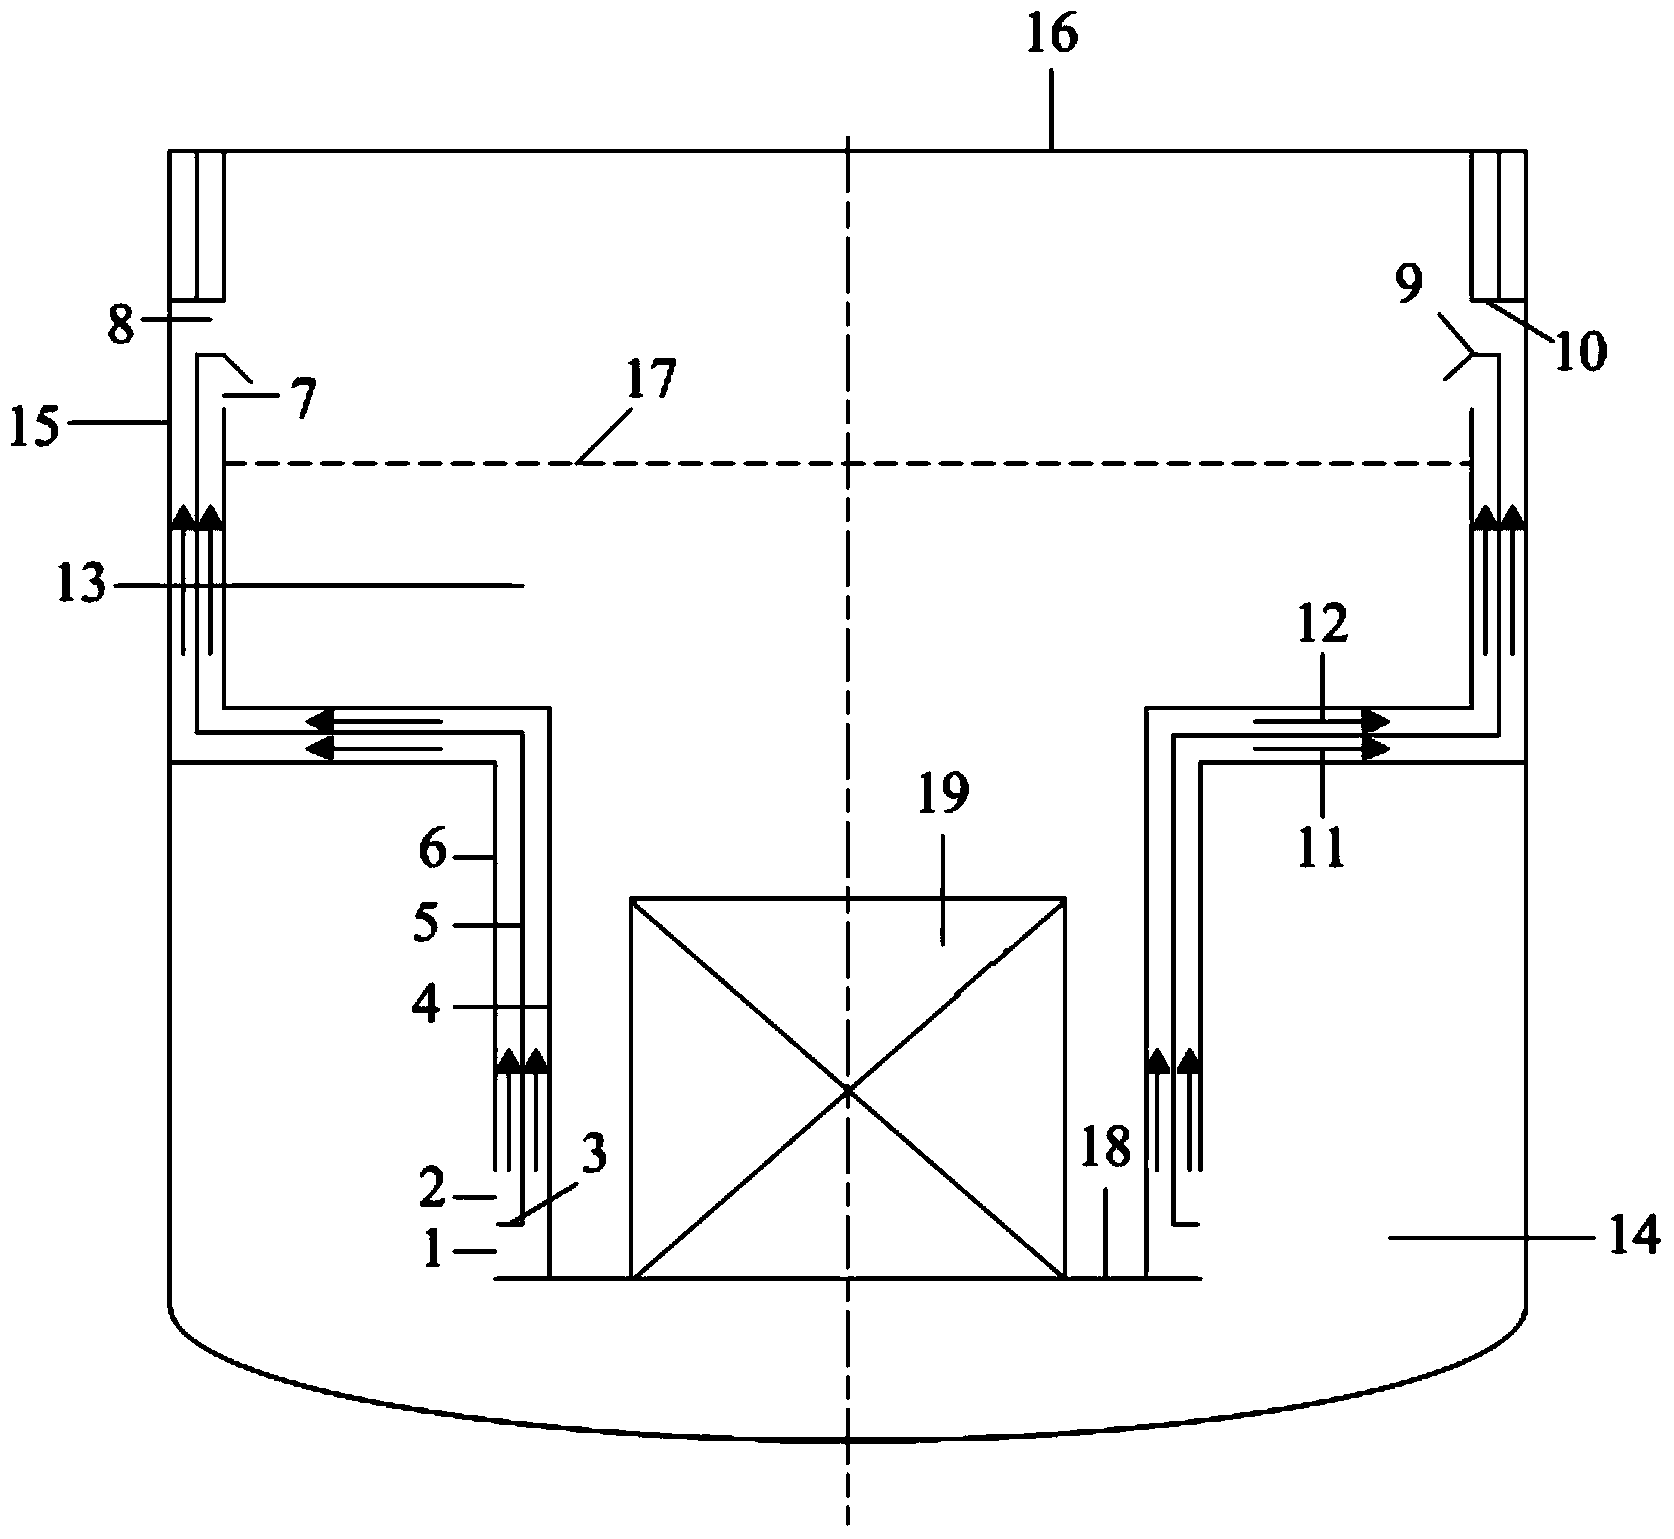 In-pile heat separation system of liquid heavy metal cooling natural circulating pool type reactor